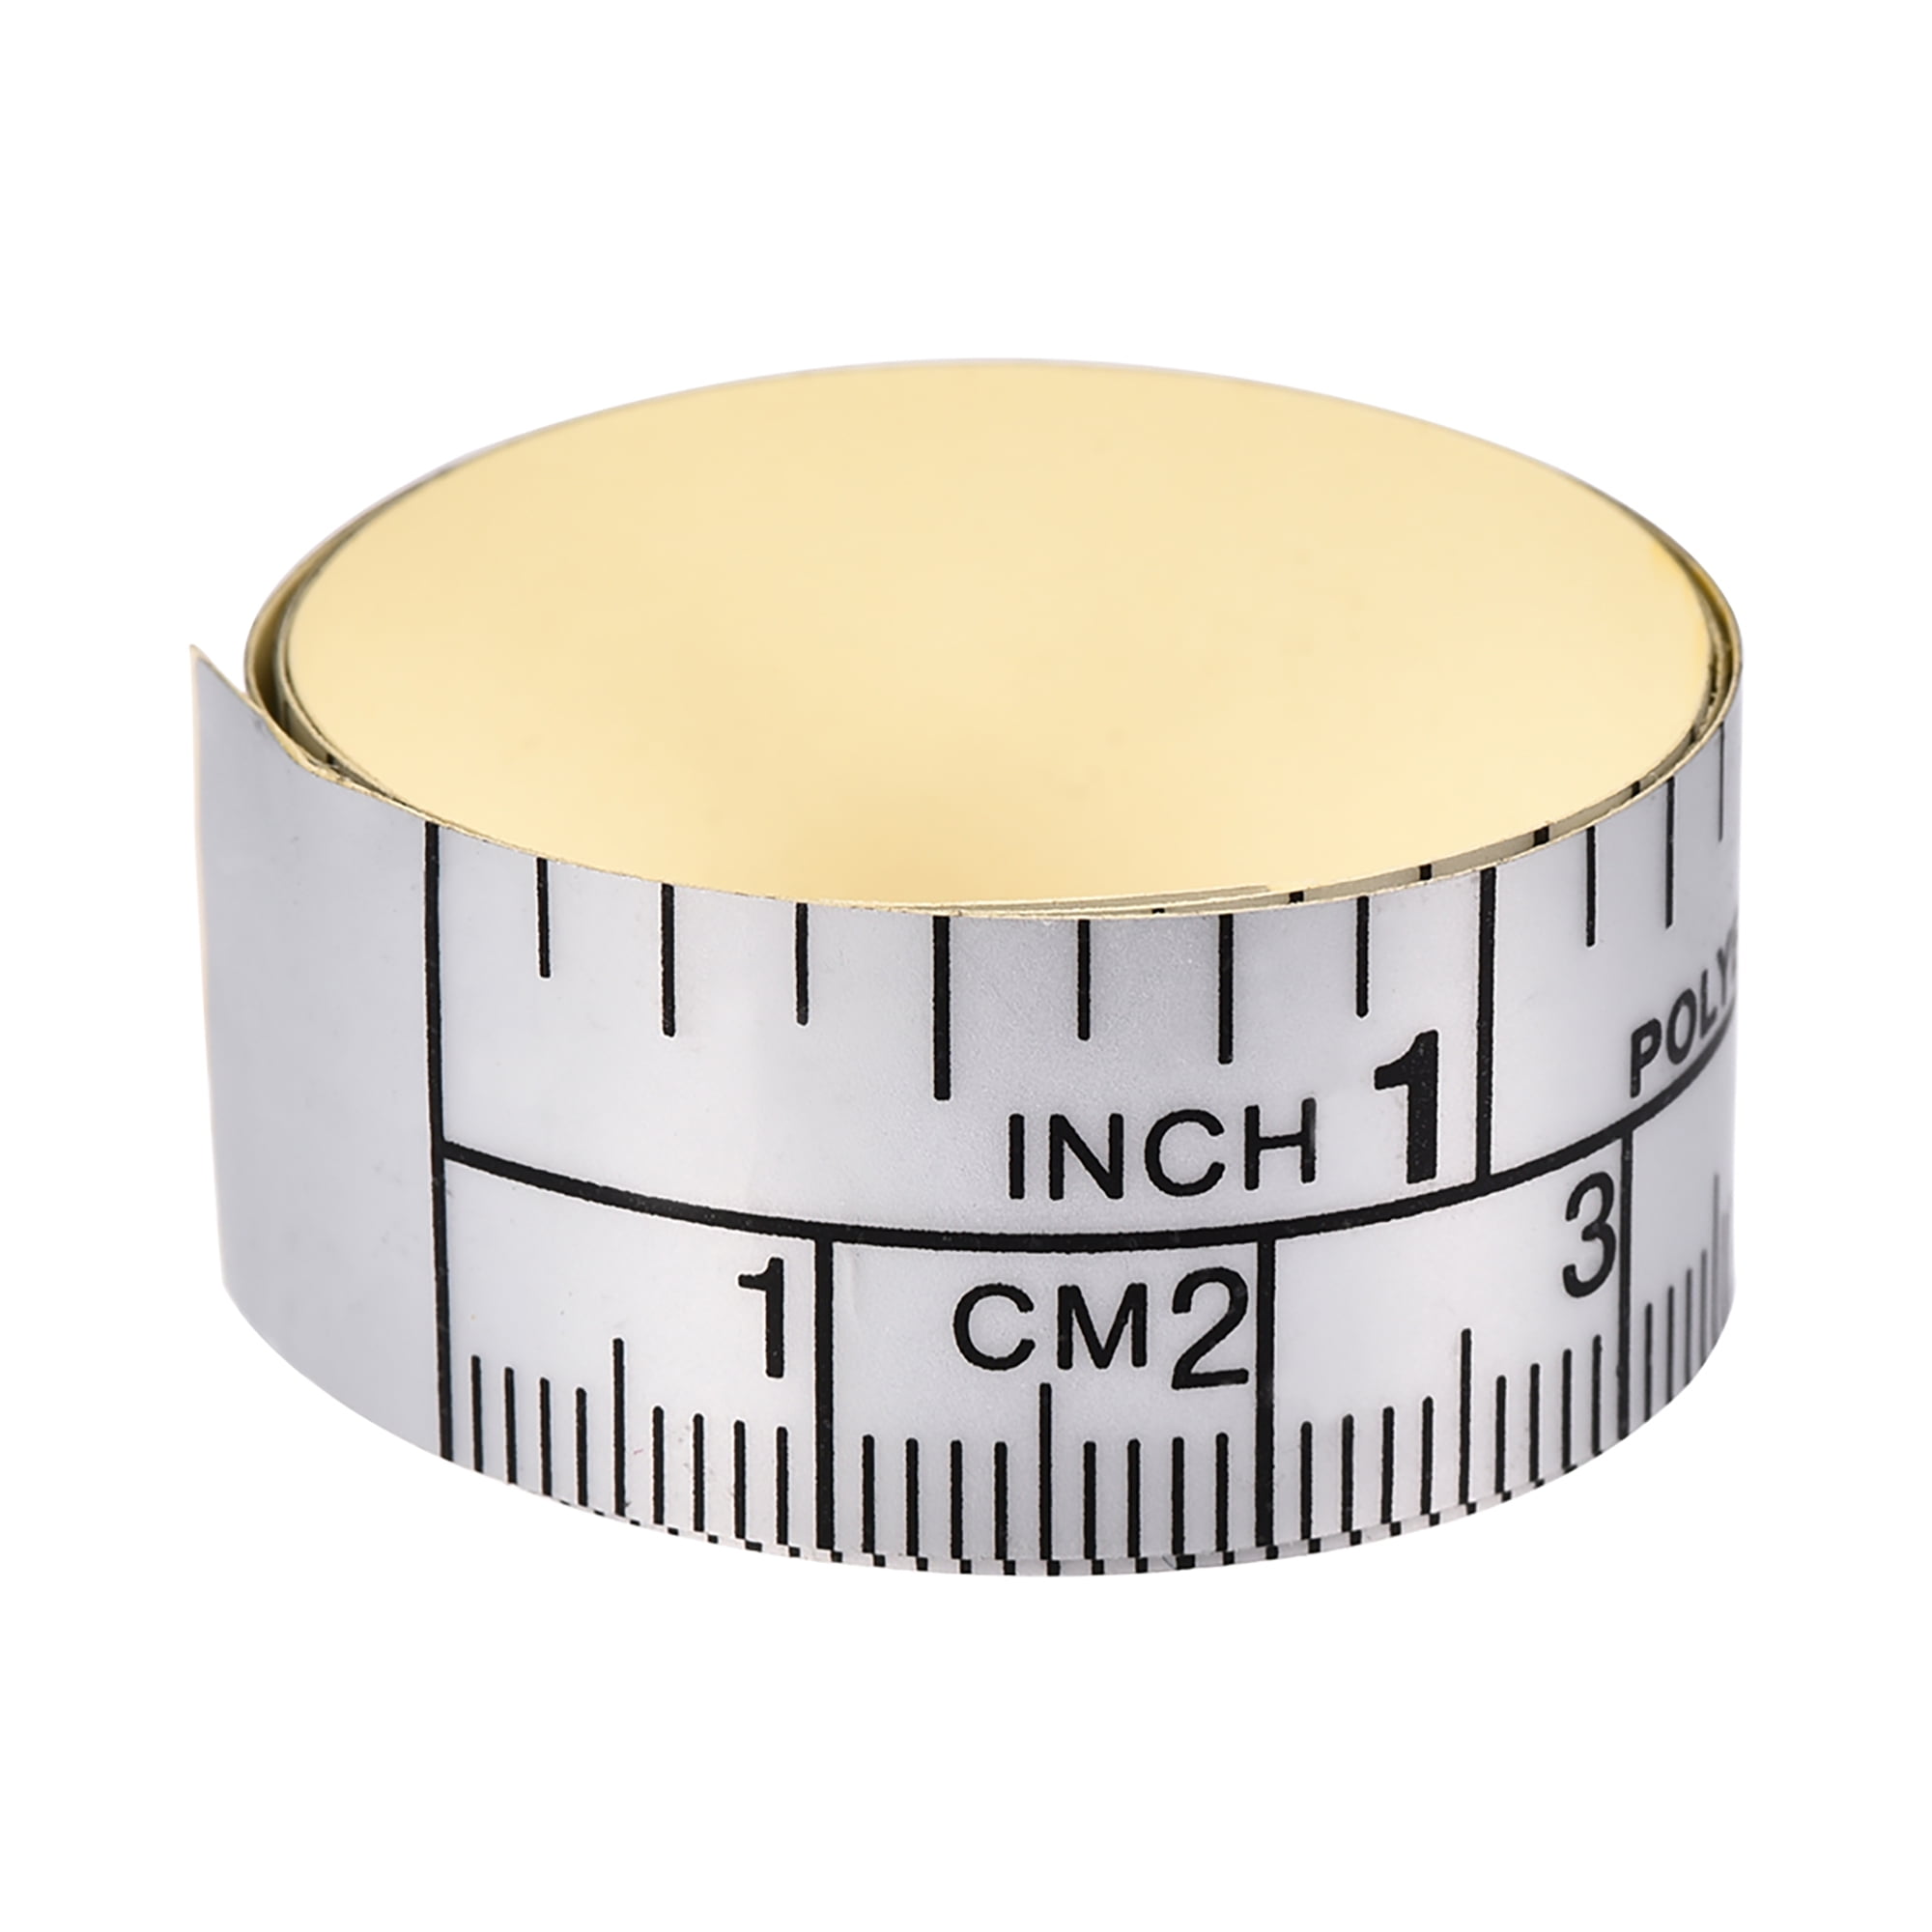 Abudder 12 Pack Small Metric Tape Measures ,Small Tape Measures Bulk Retractable with Inches and Centimeters ,Measurement Tape 6